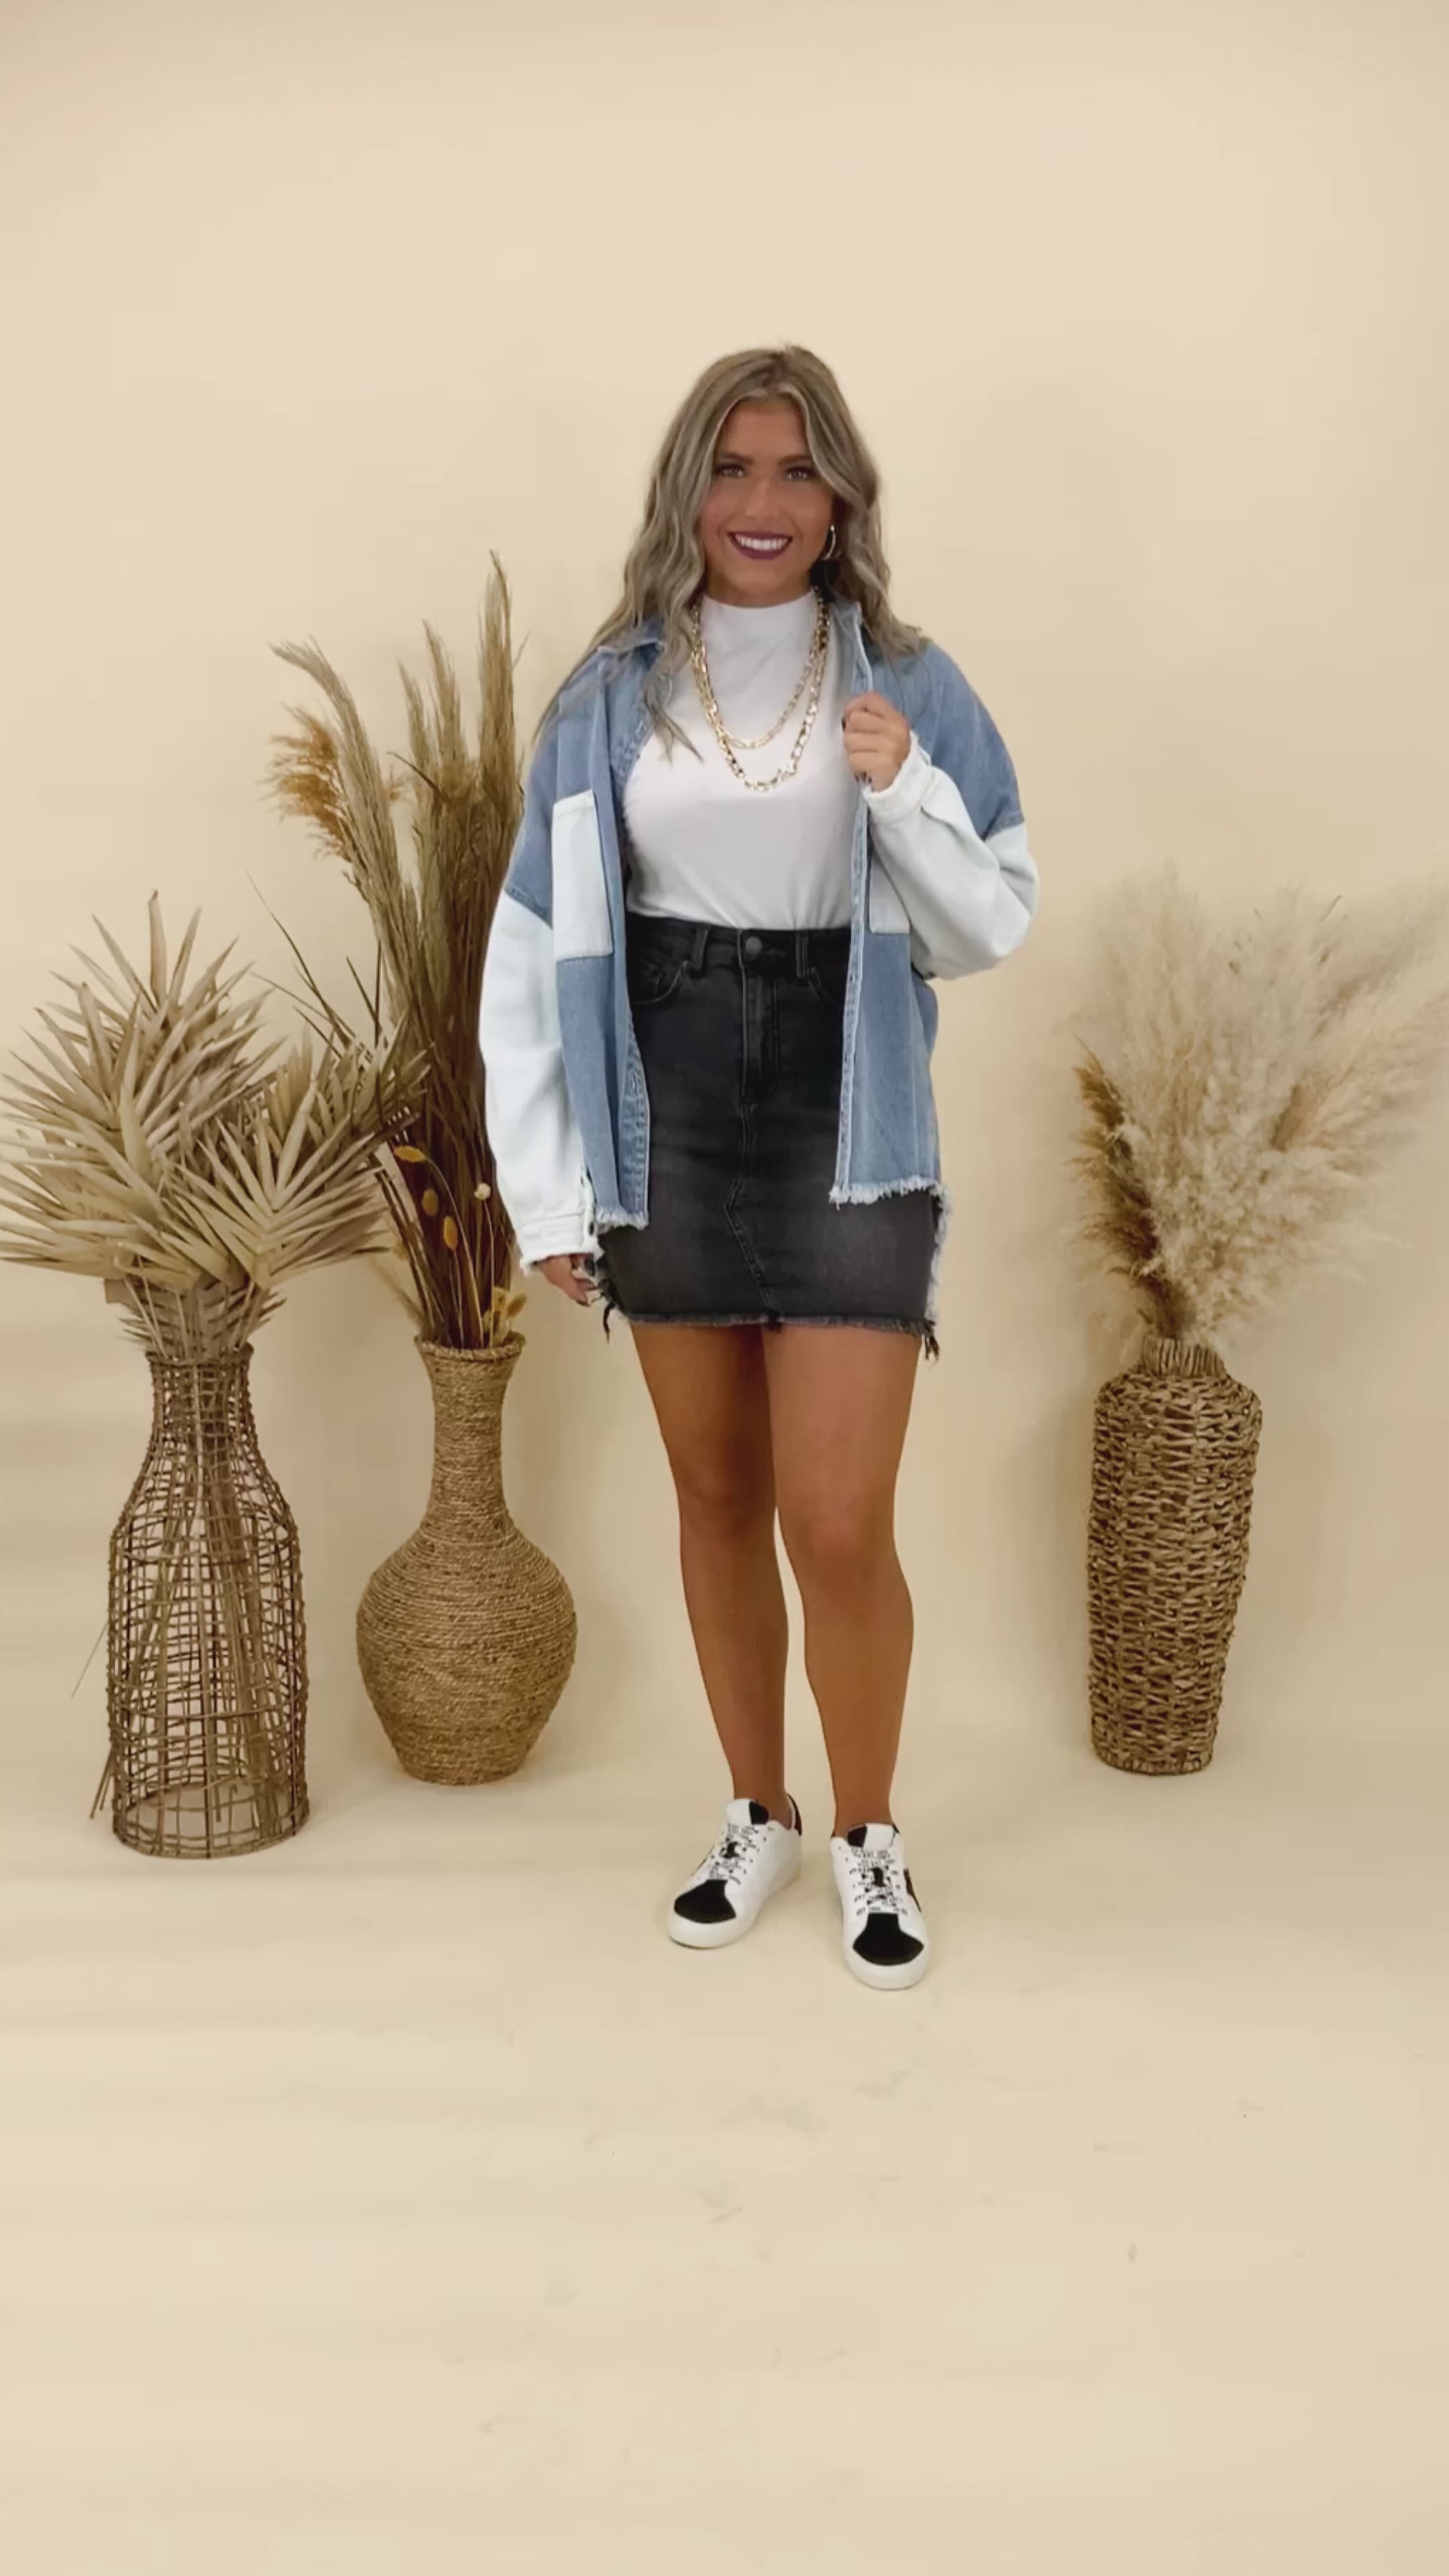 20 Best Outfit Ideas for How to Wear a Denim Skirt - Be So You